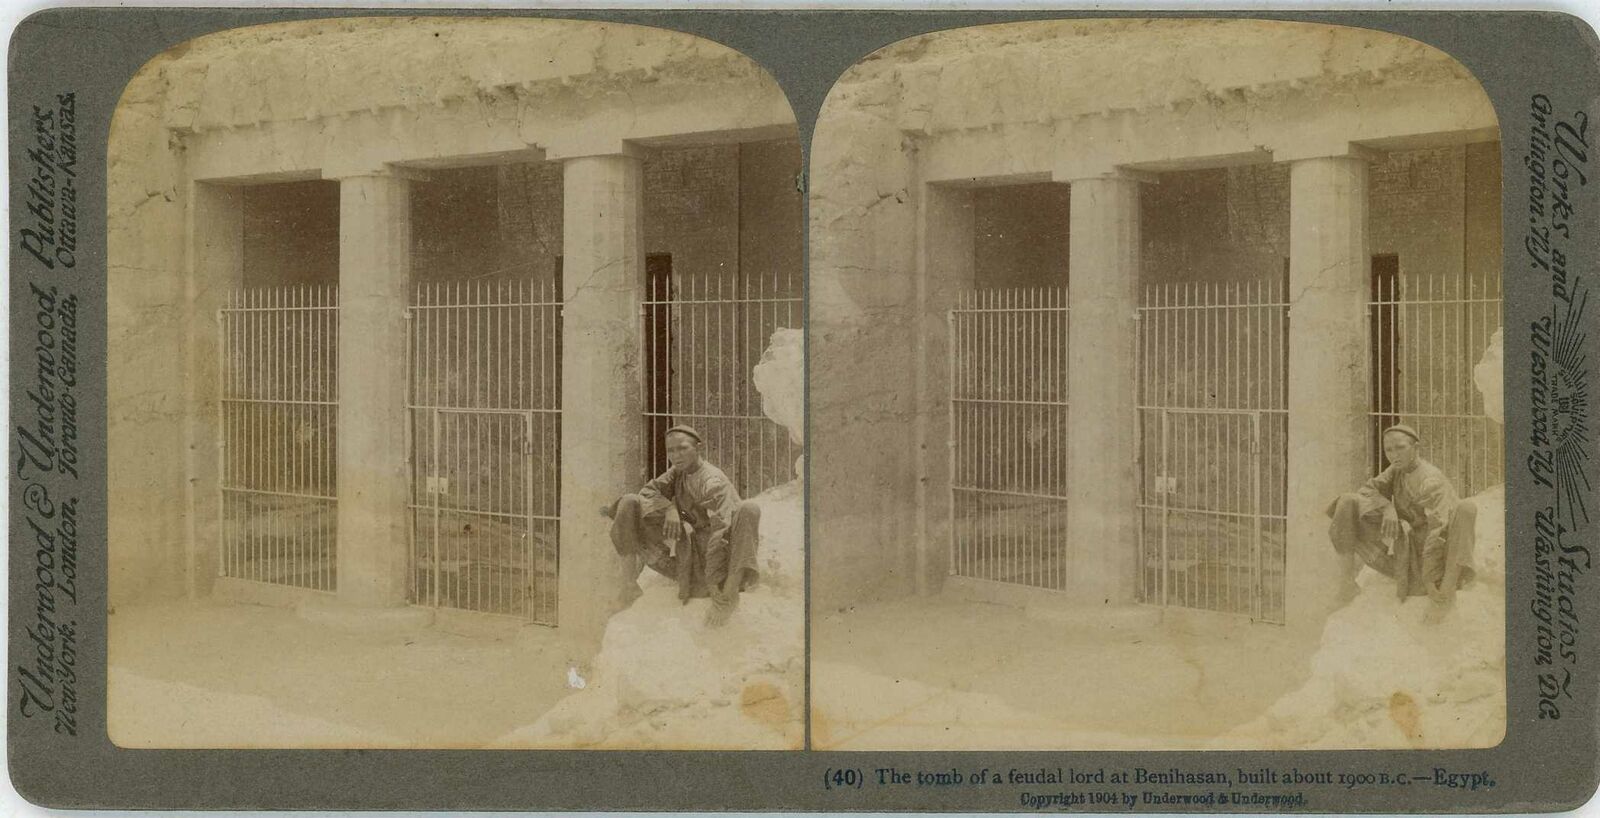 Egypt ~ BENIHASAN ~ Tomb Of A Feudal Lord Stereoview 21810